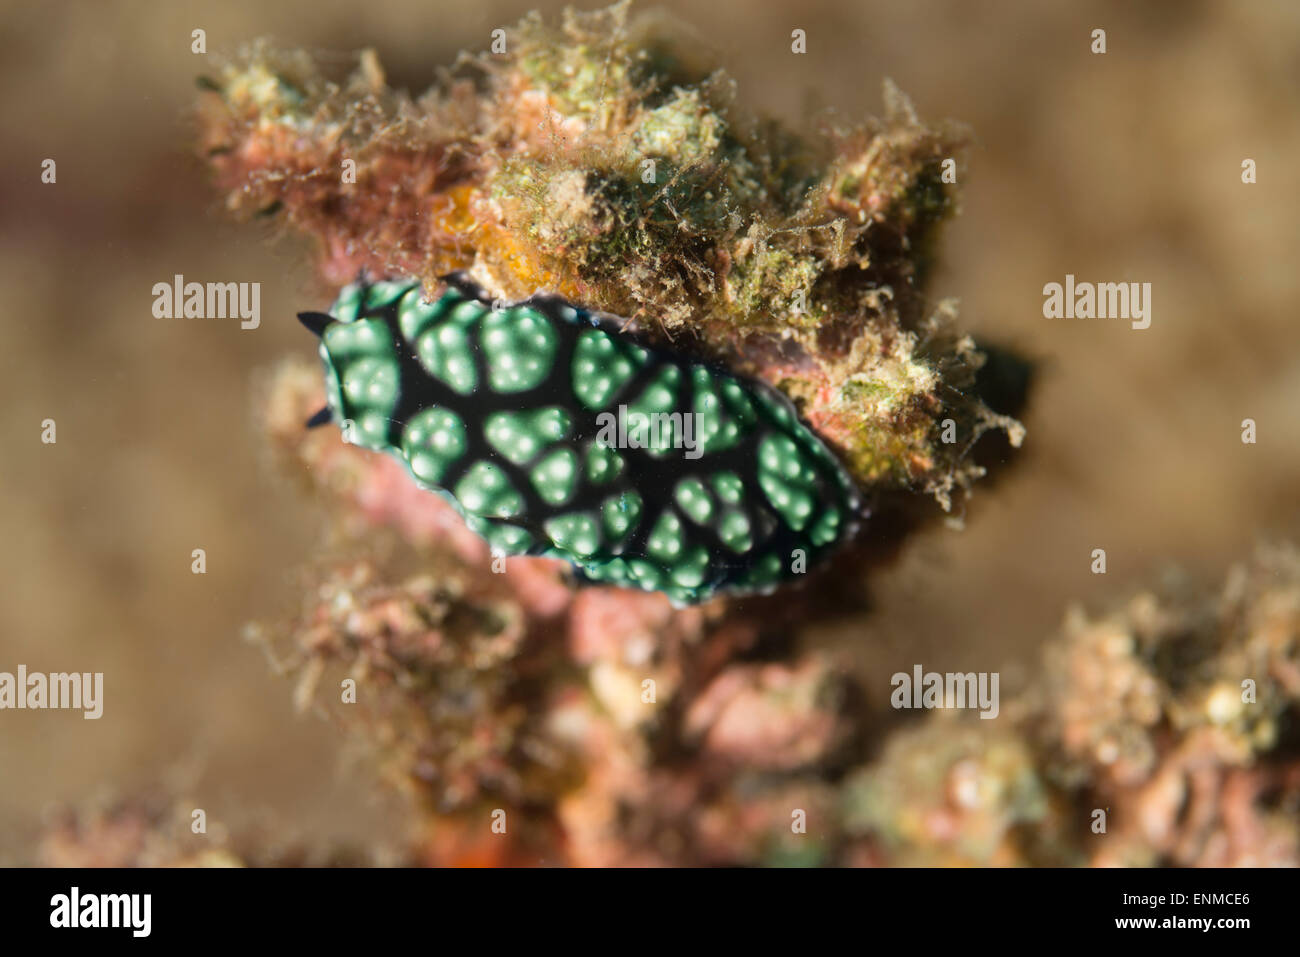 Nudibranch crawling on a coral Stock Photo